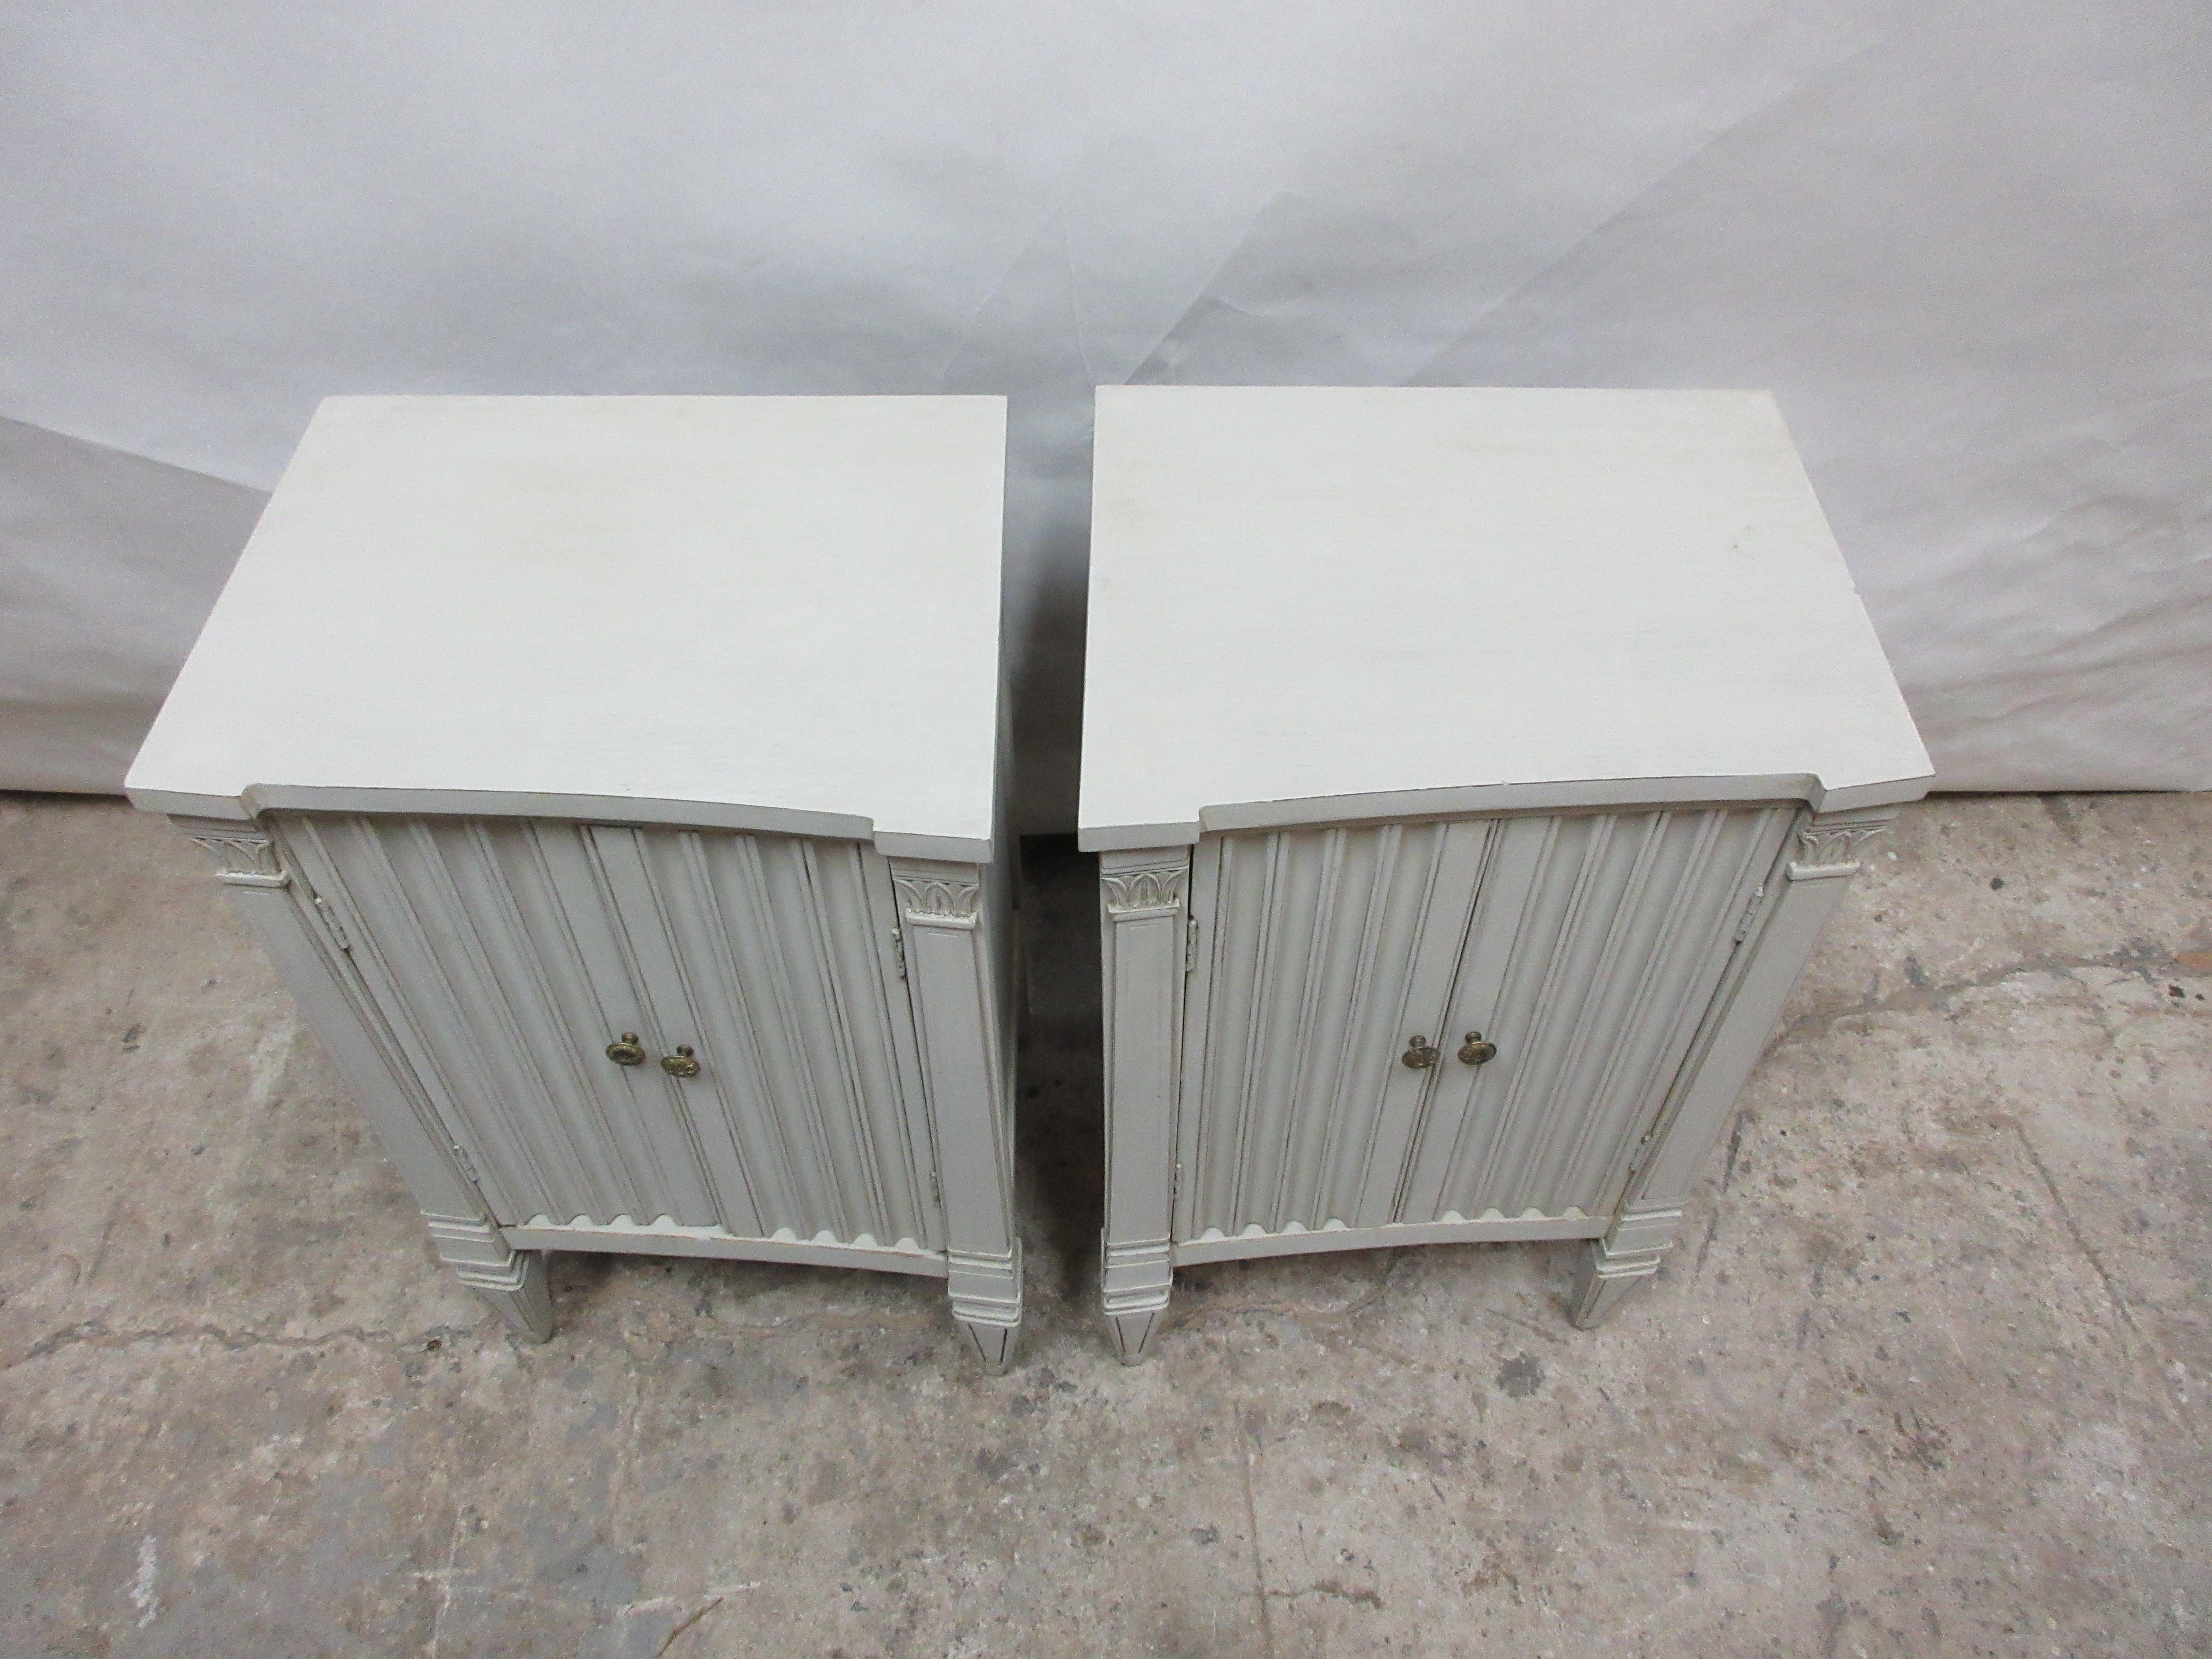 Early 20th Century Fluted Gustavian Nightstands